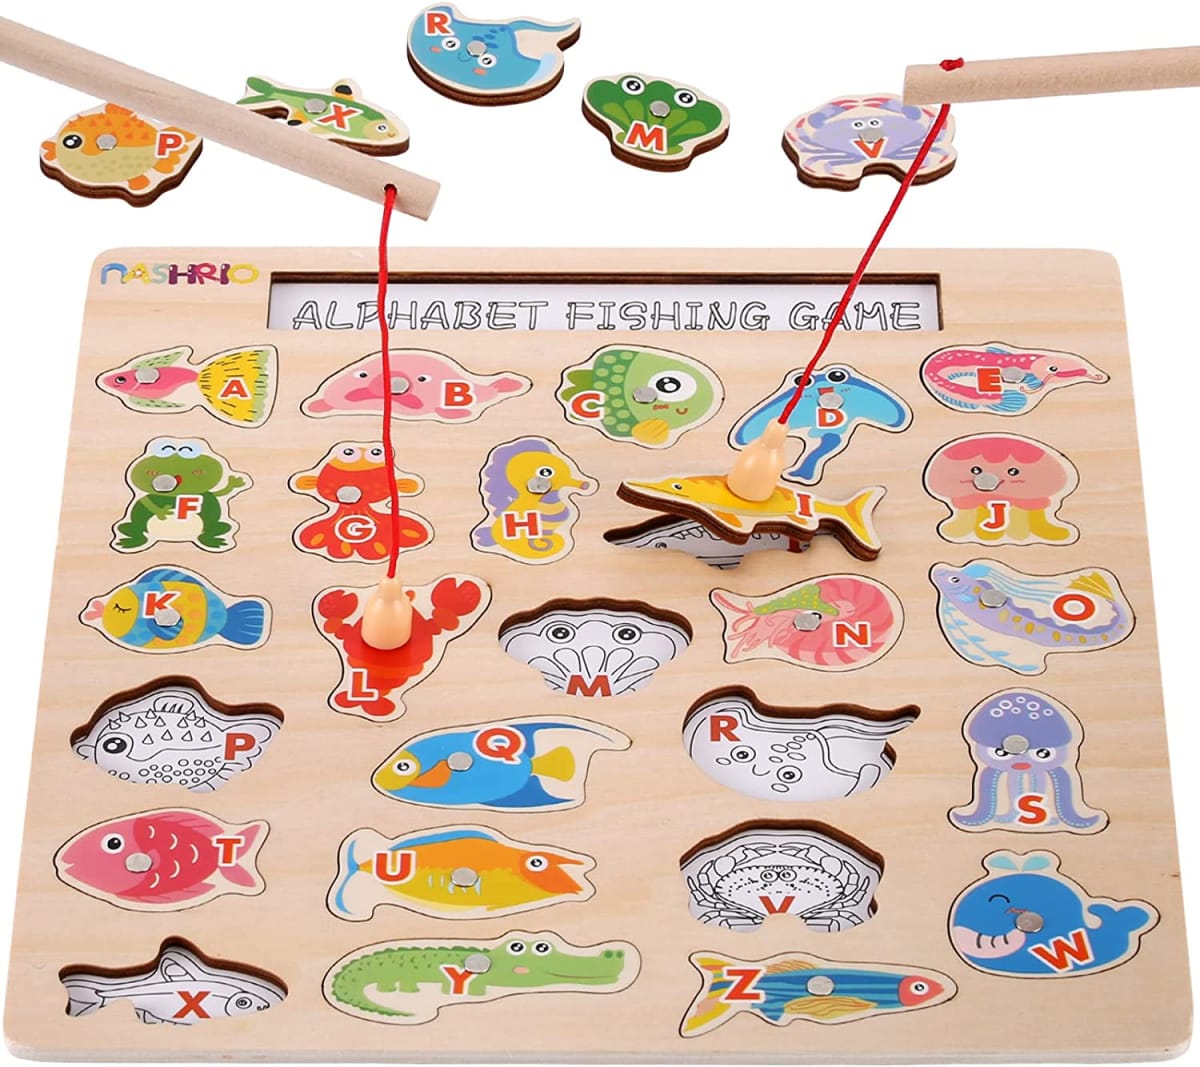 Magnetic Wooden Fishing Game Toy for Toddlers, Alphabet Fish Catching Games Puzzle with Letters, Preschool Learning ABC Educational Toys for 3 4 5 6 Years Old Girl Boy Kids